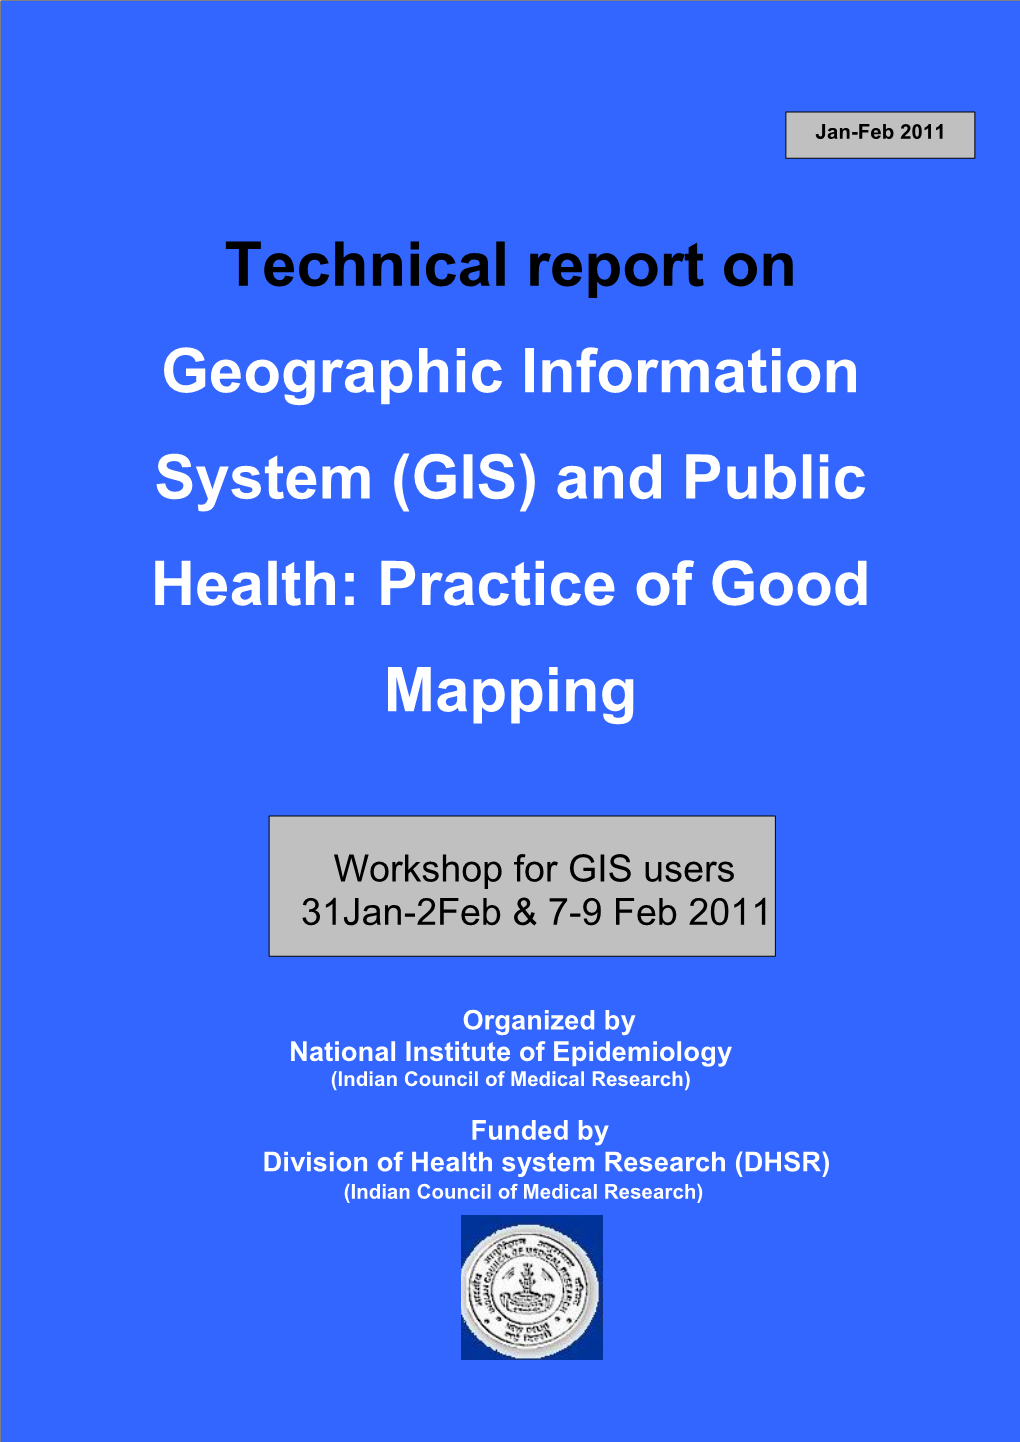 Technical Report on Geographic Information System (GIS) and Public Health: Practice of Good Mapping